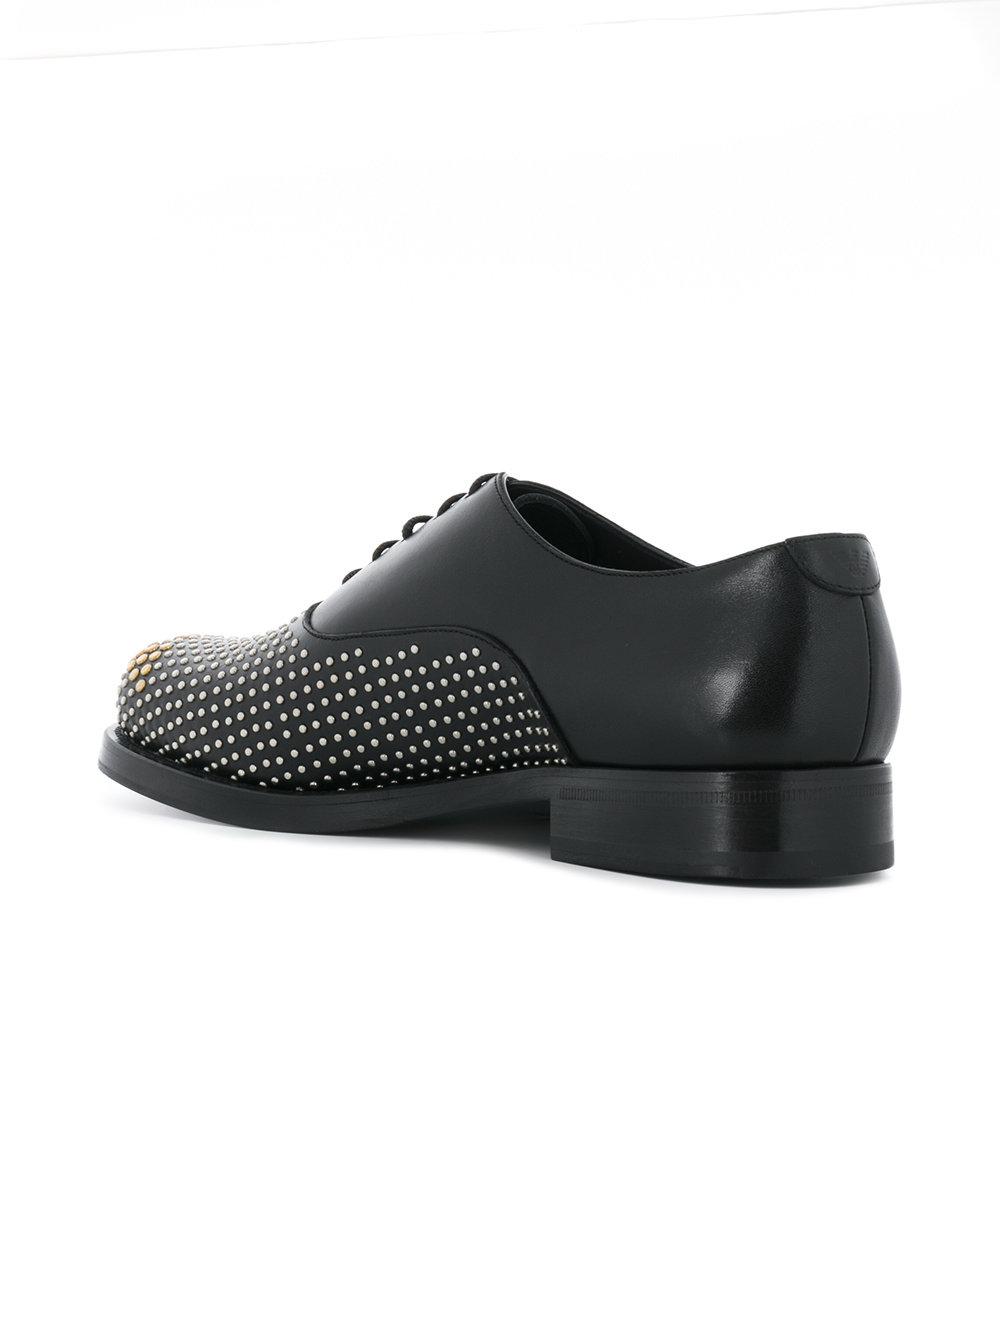 Emporio Armani Leather Studded Lace-up Shoes in Black for Men - Lyst